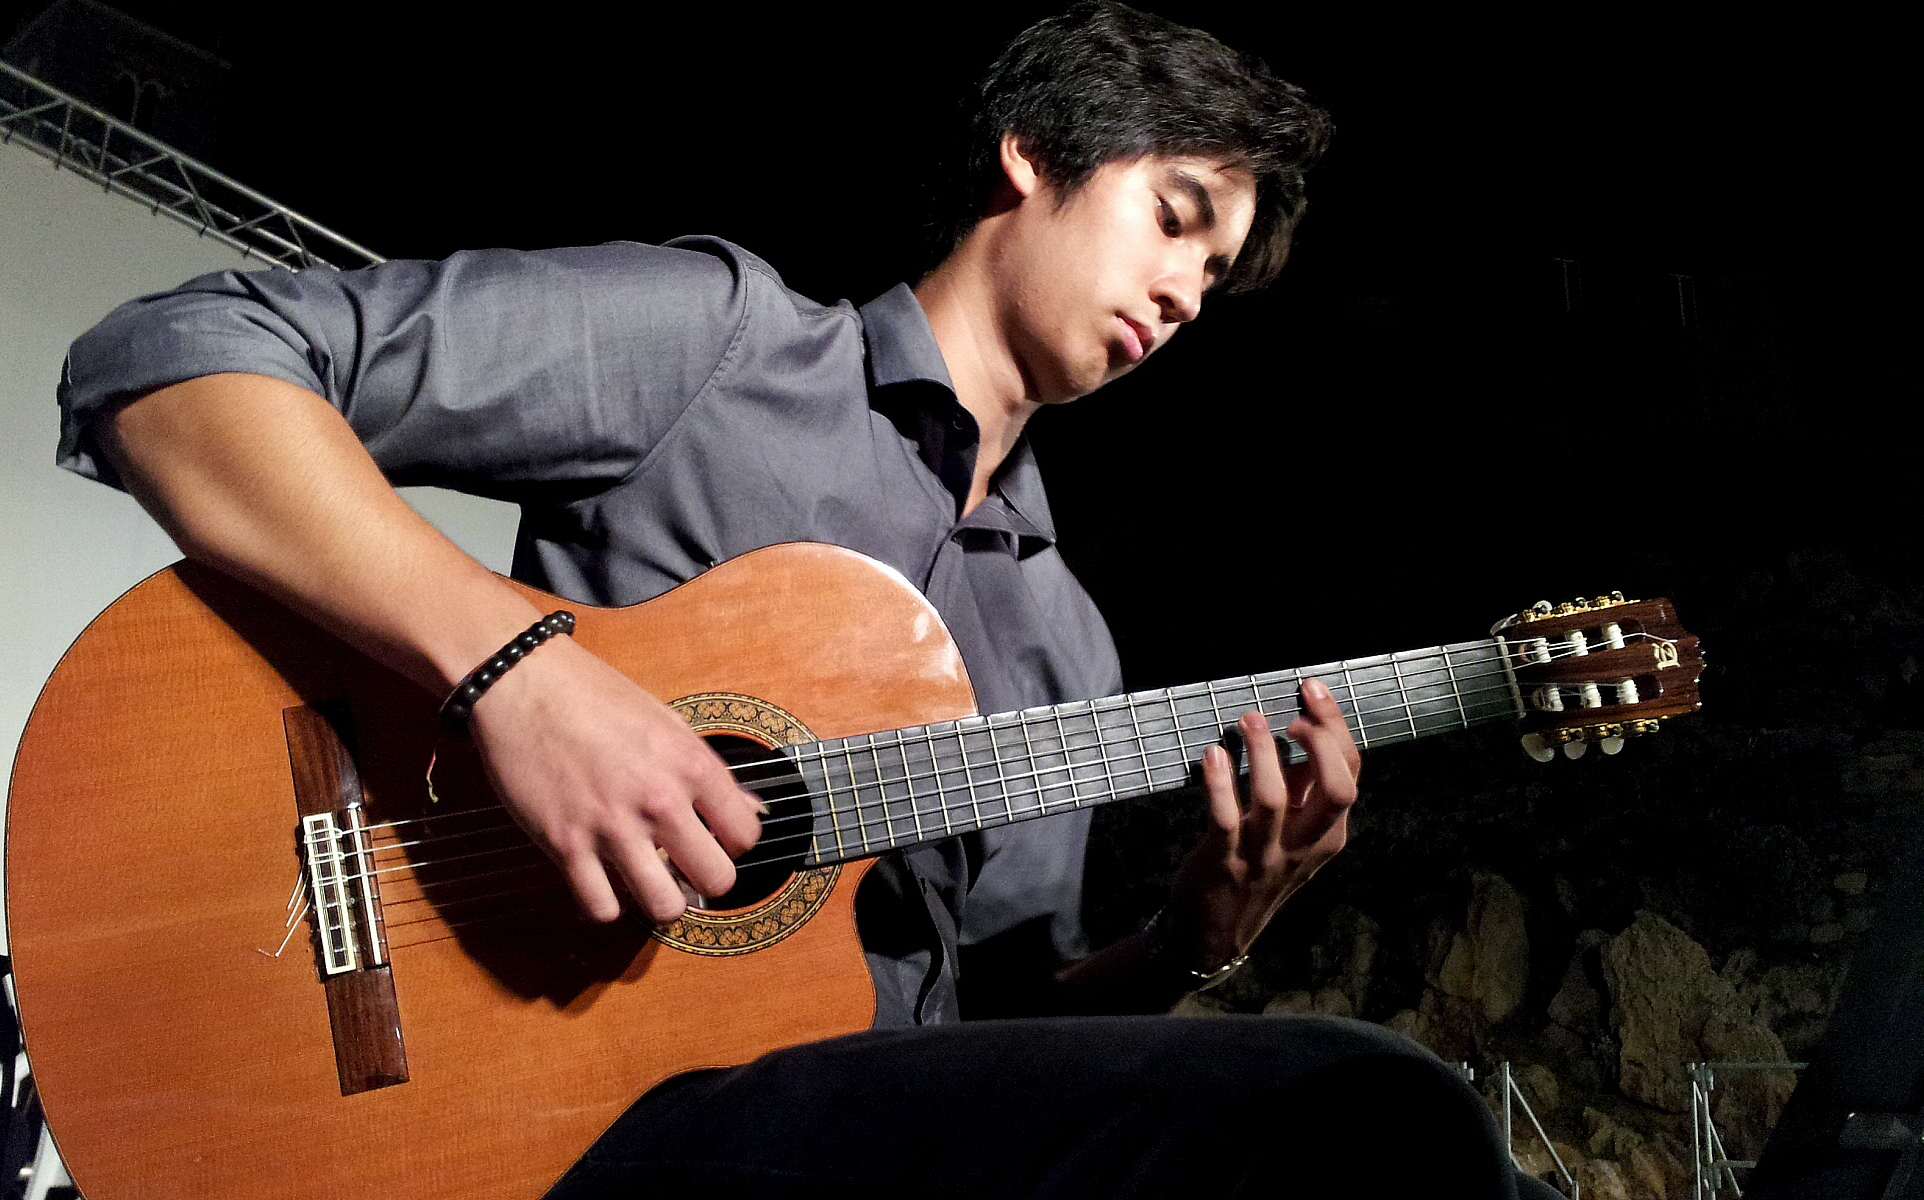 The Young Guitarist...